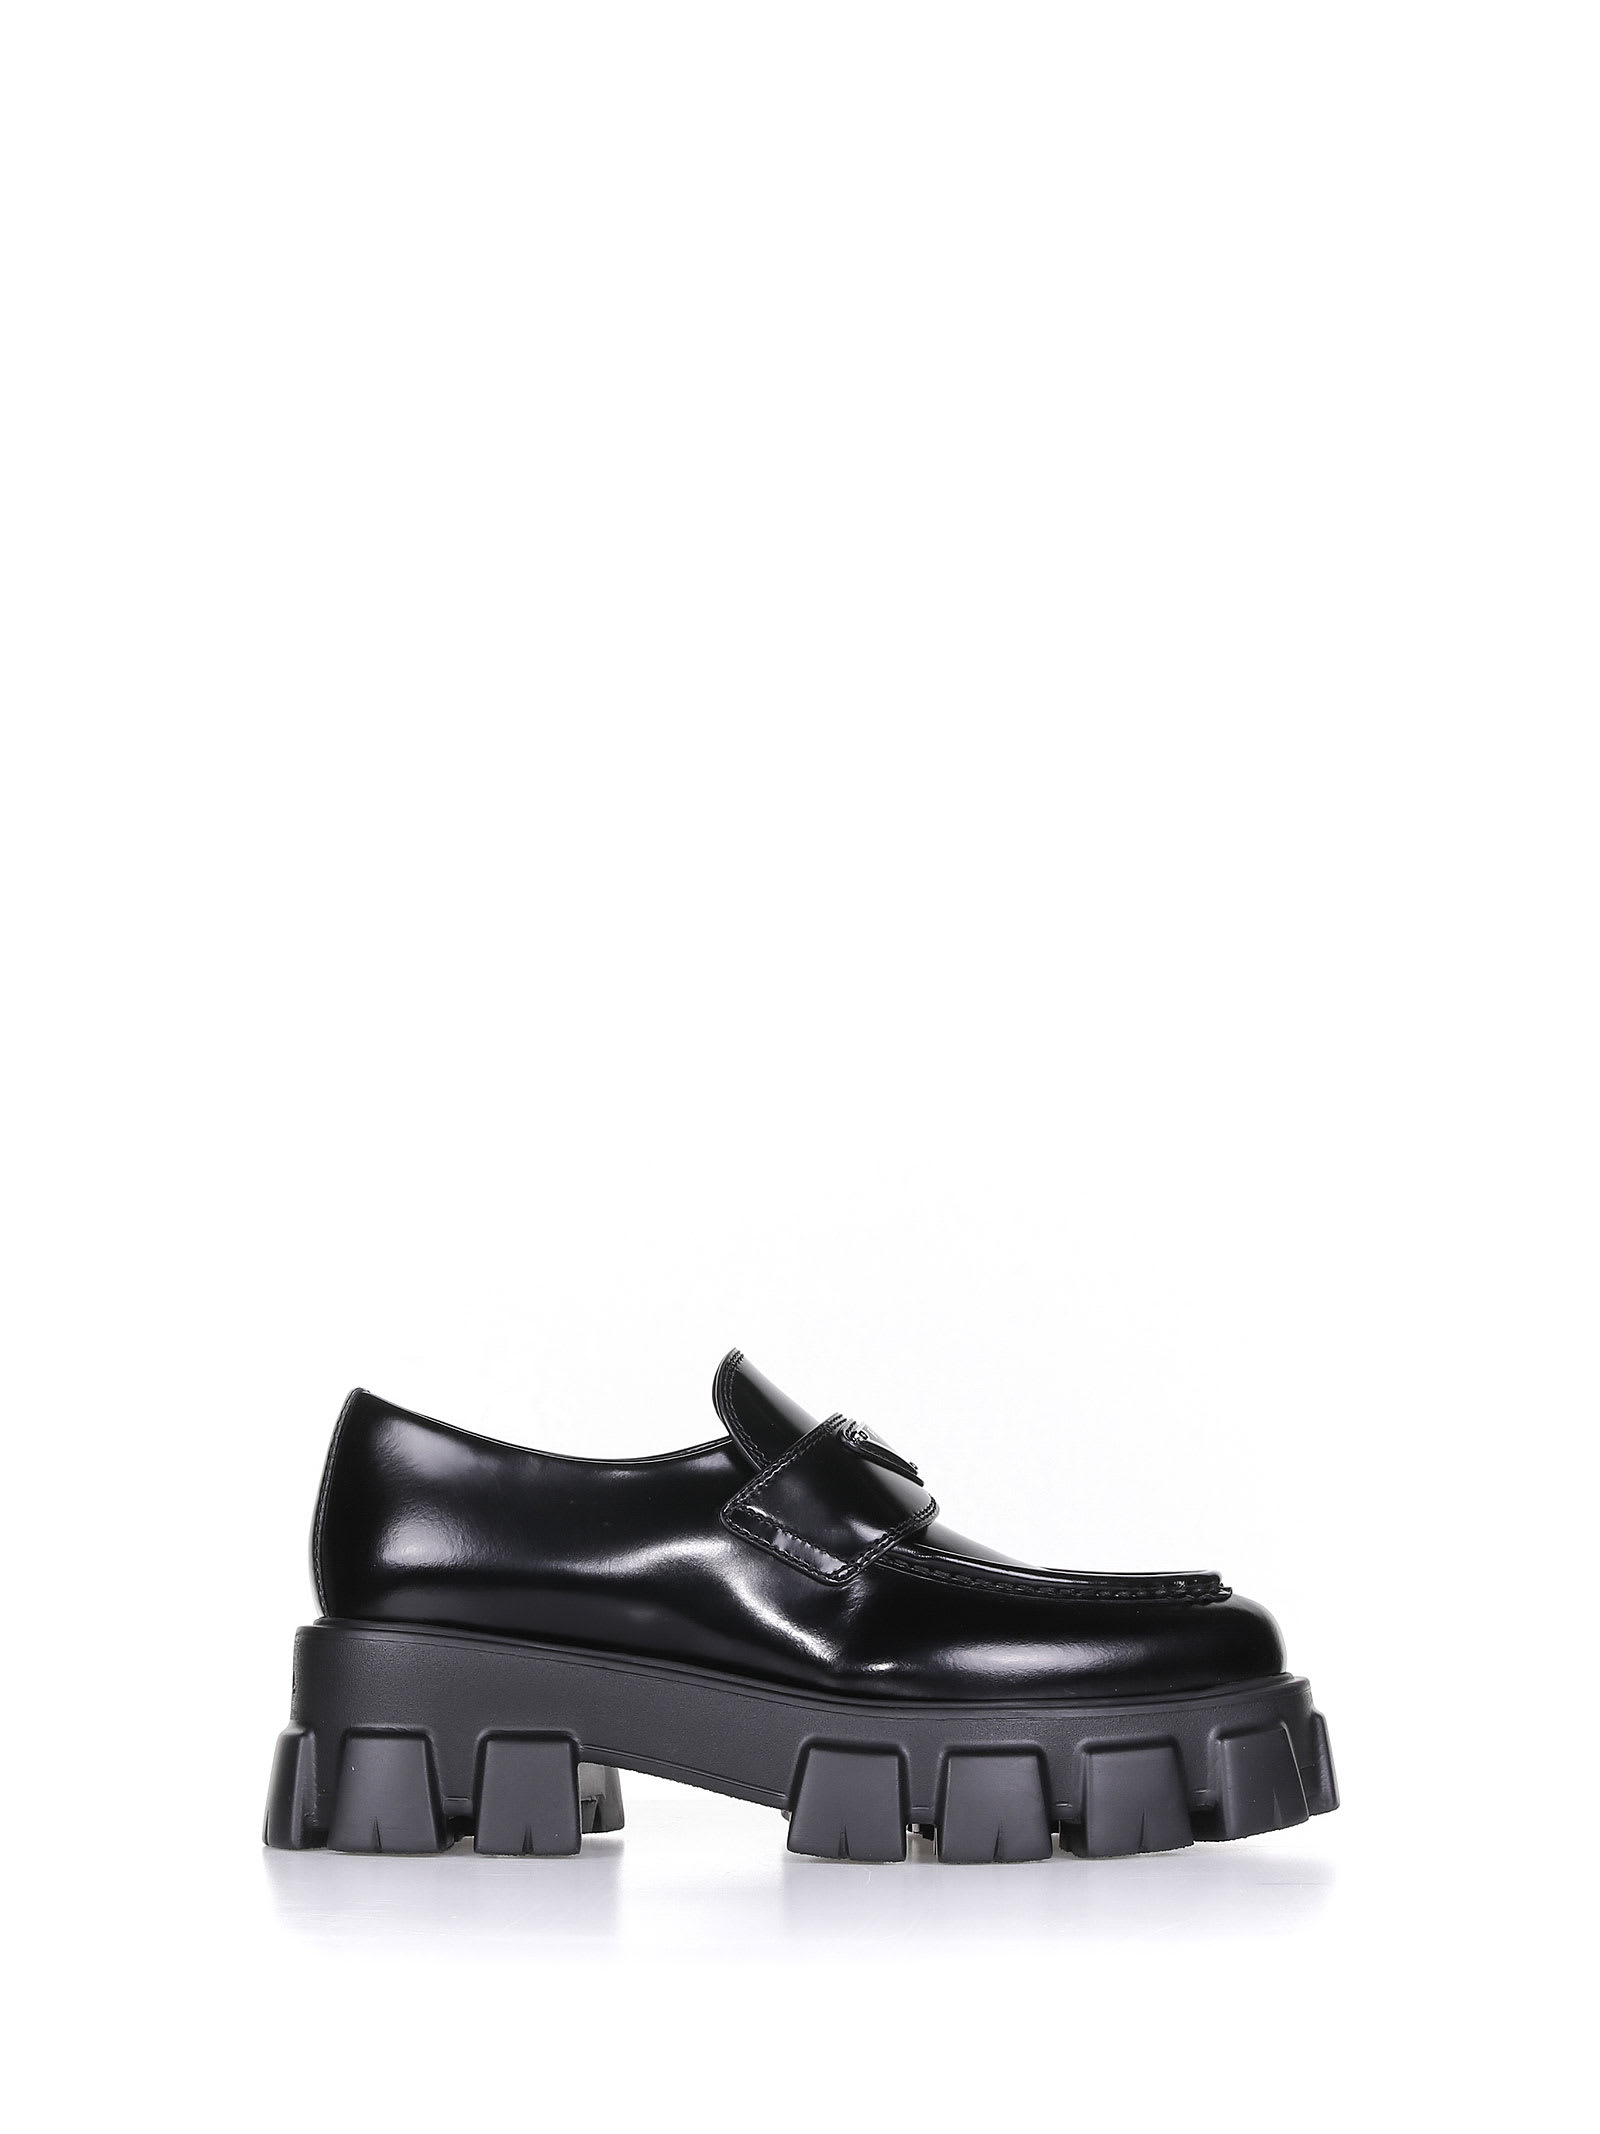 Buy Prada Monolith Loafers In Black Leather online, shop Prada shoes with free shipping